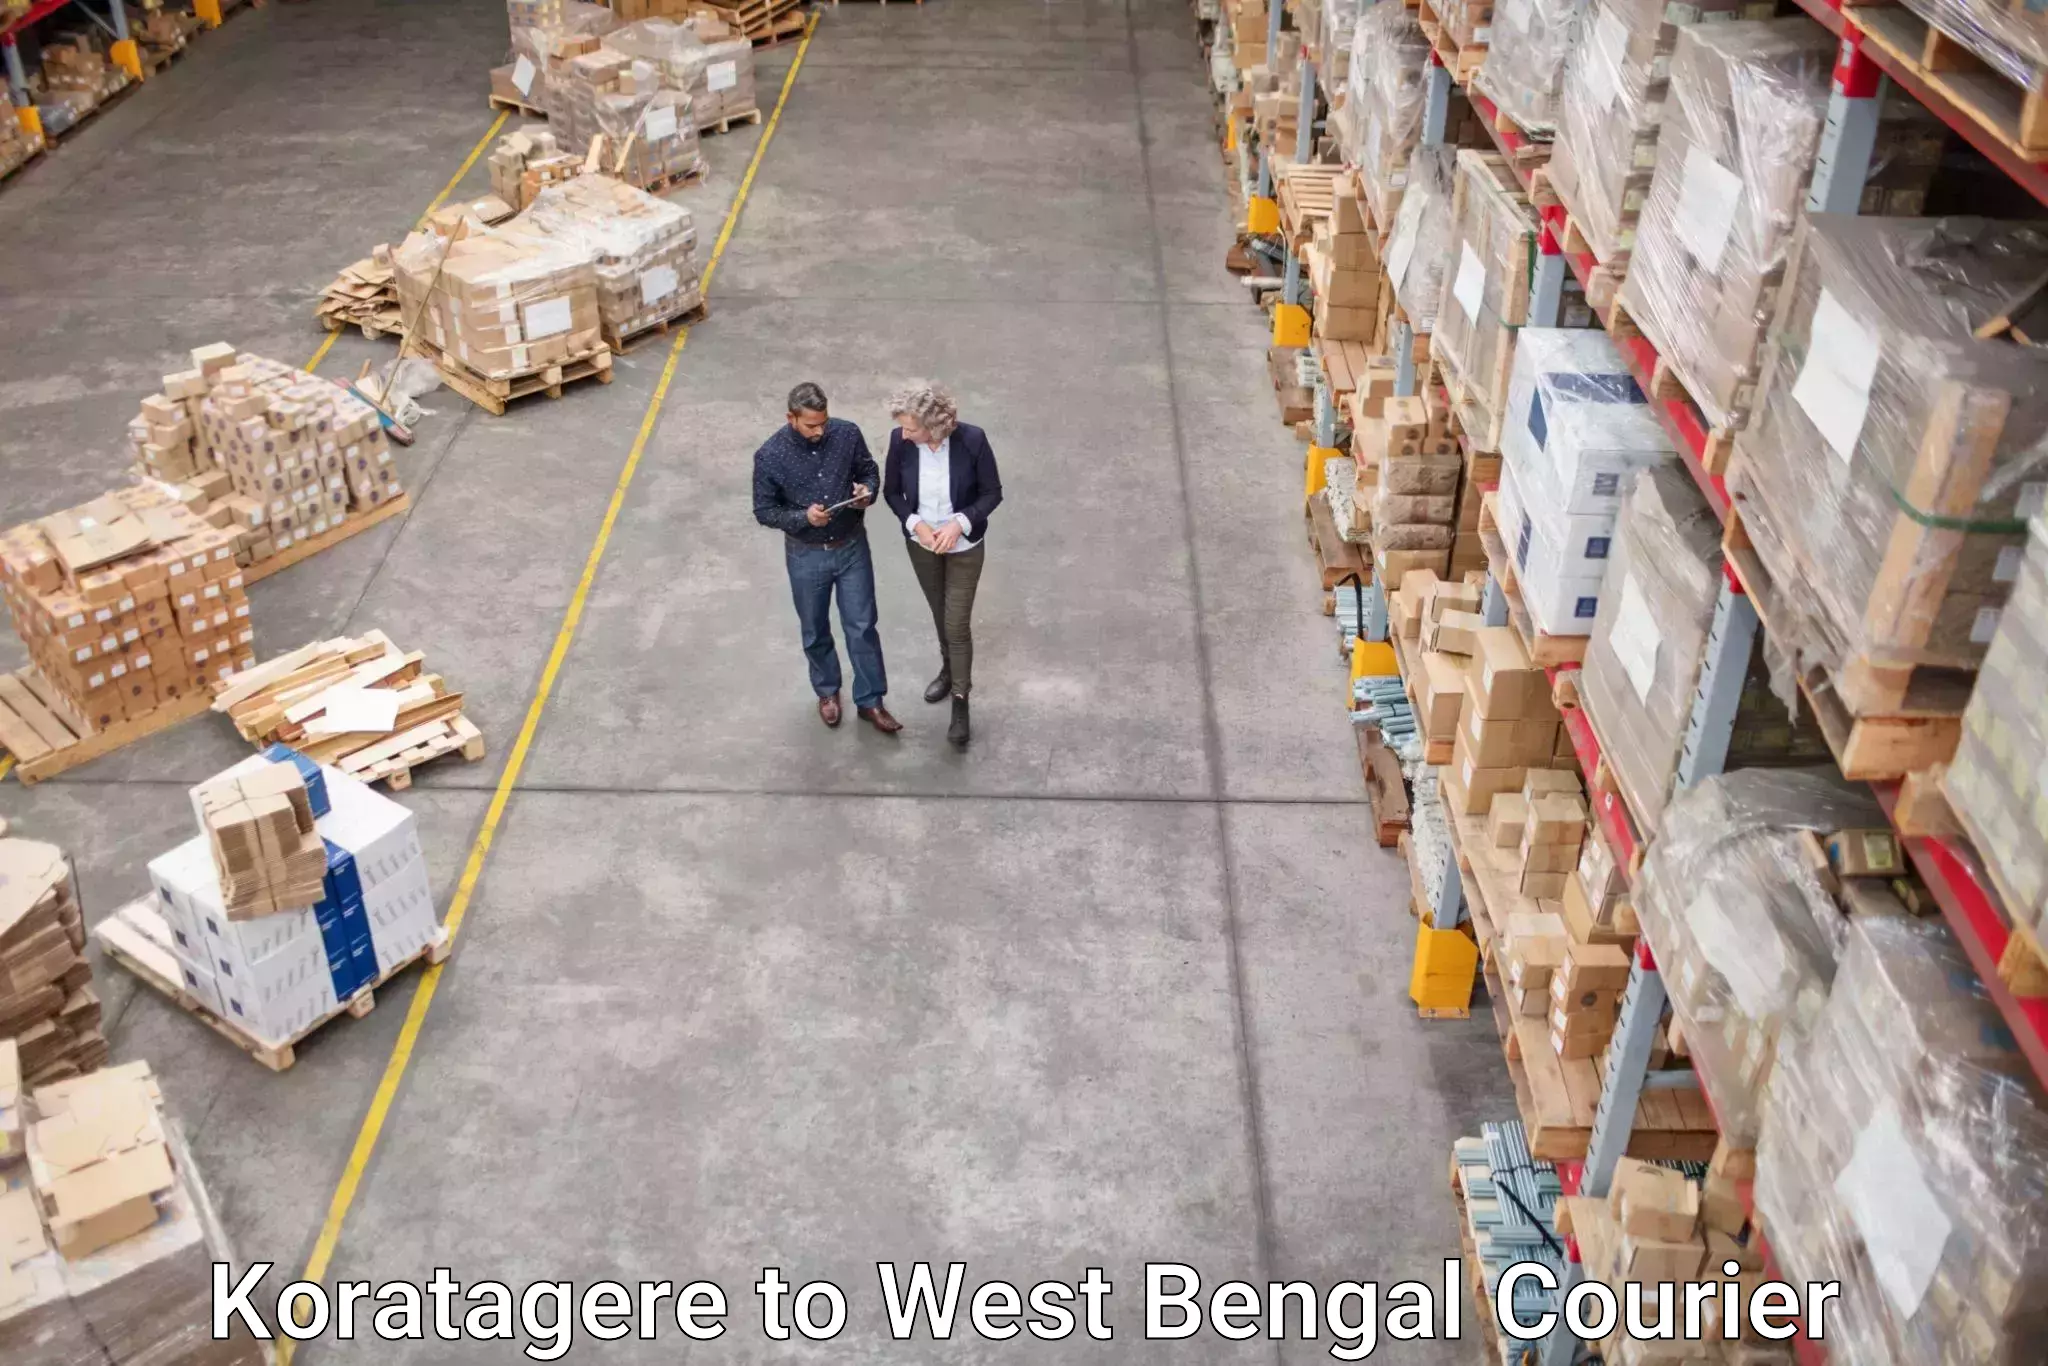 Next-generation courier services Koratagere to Chandrakona Road